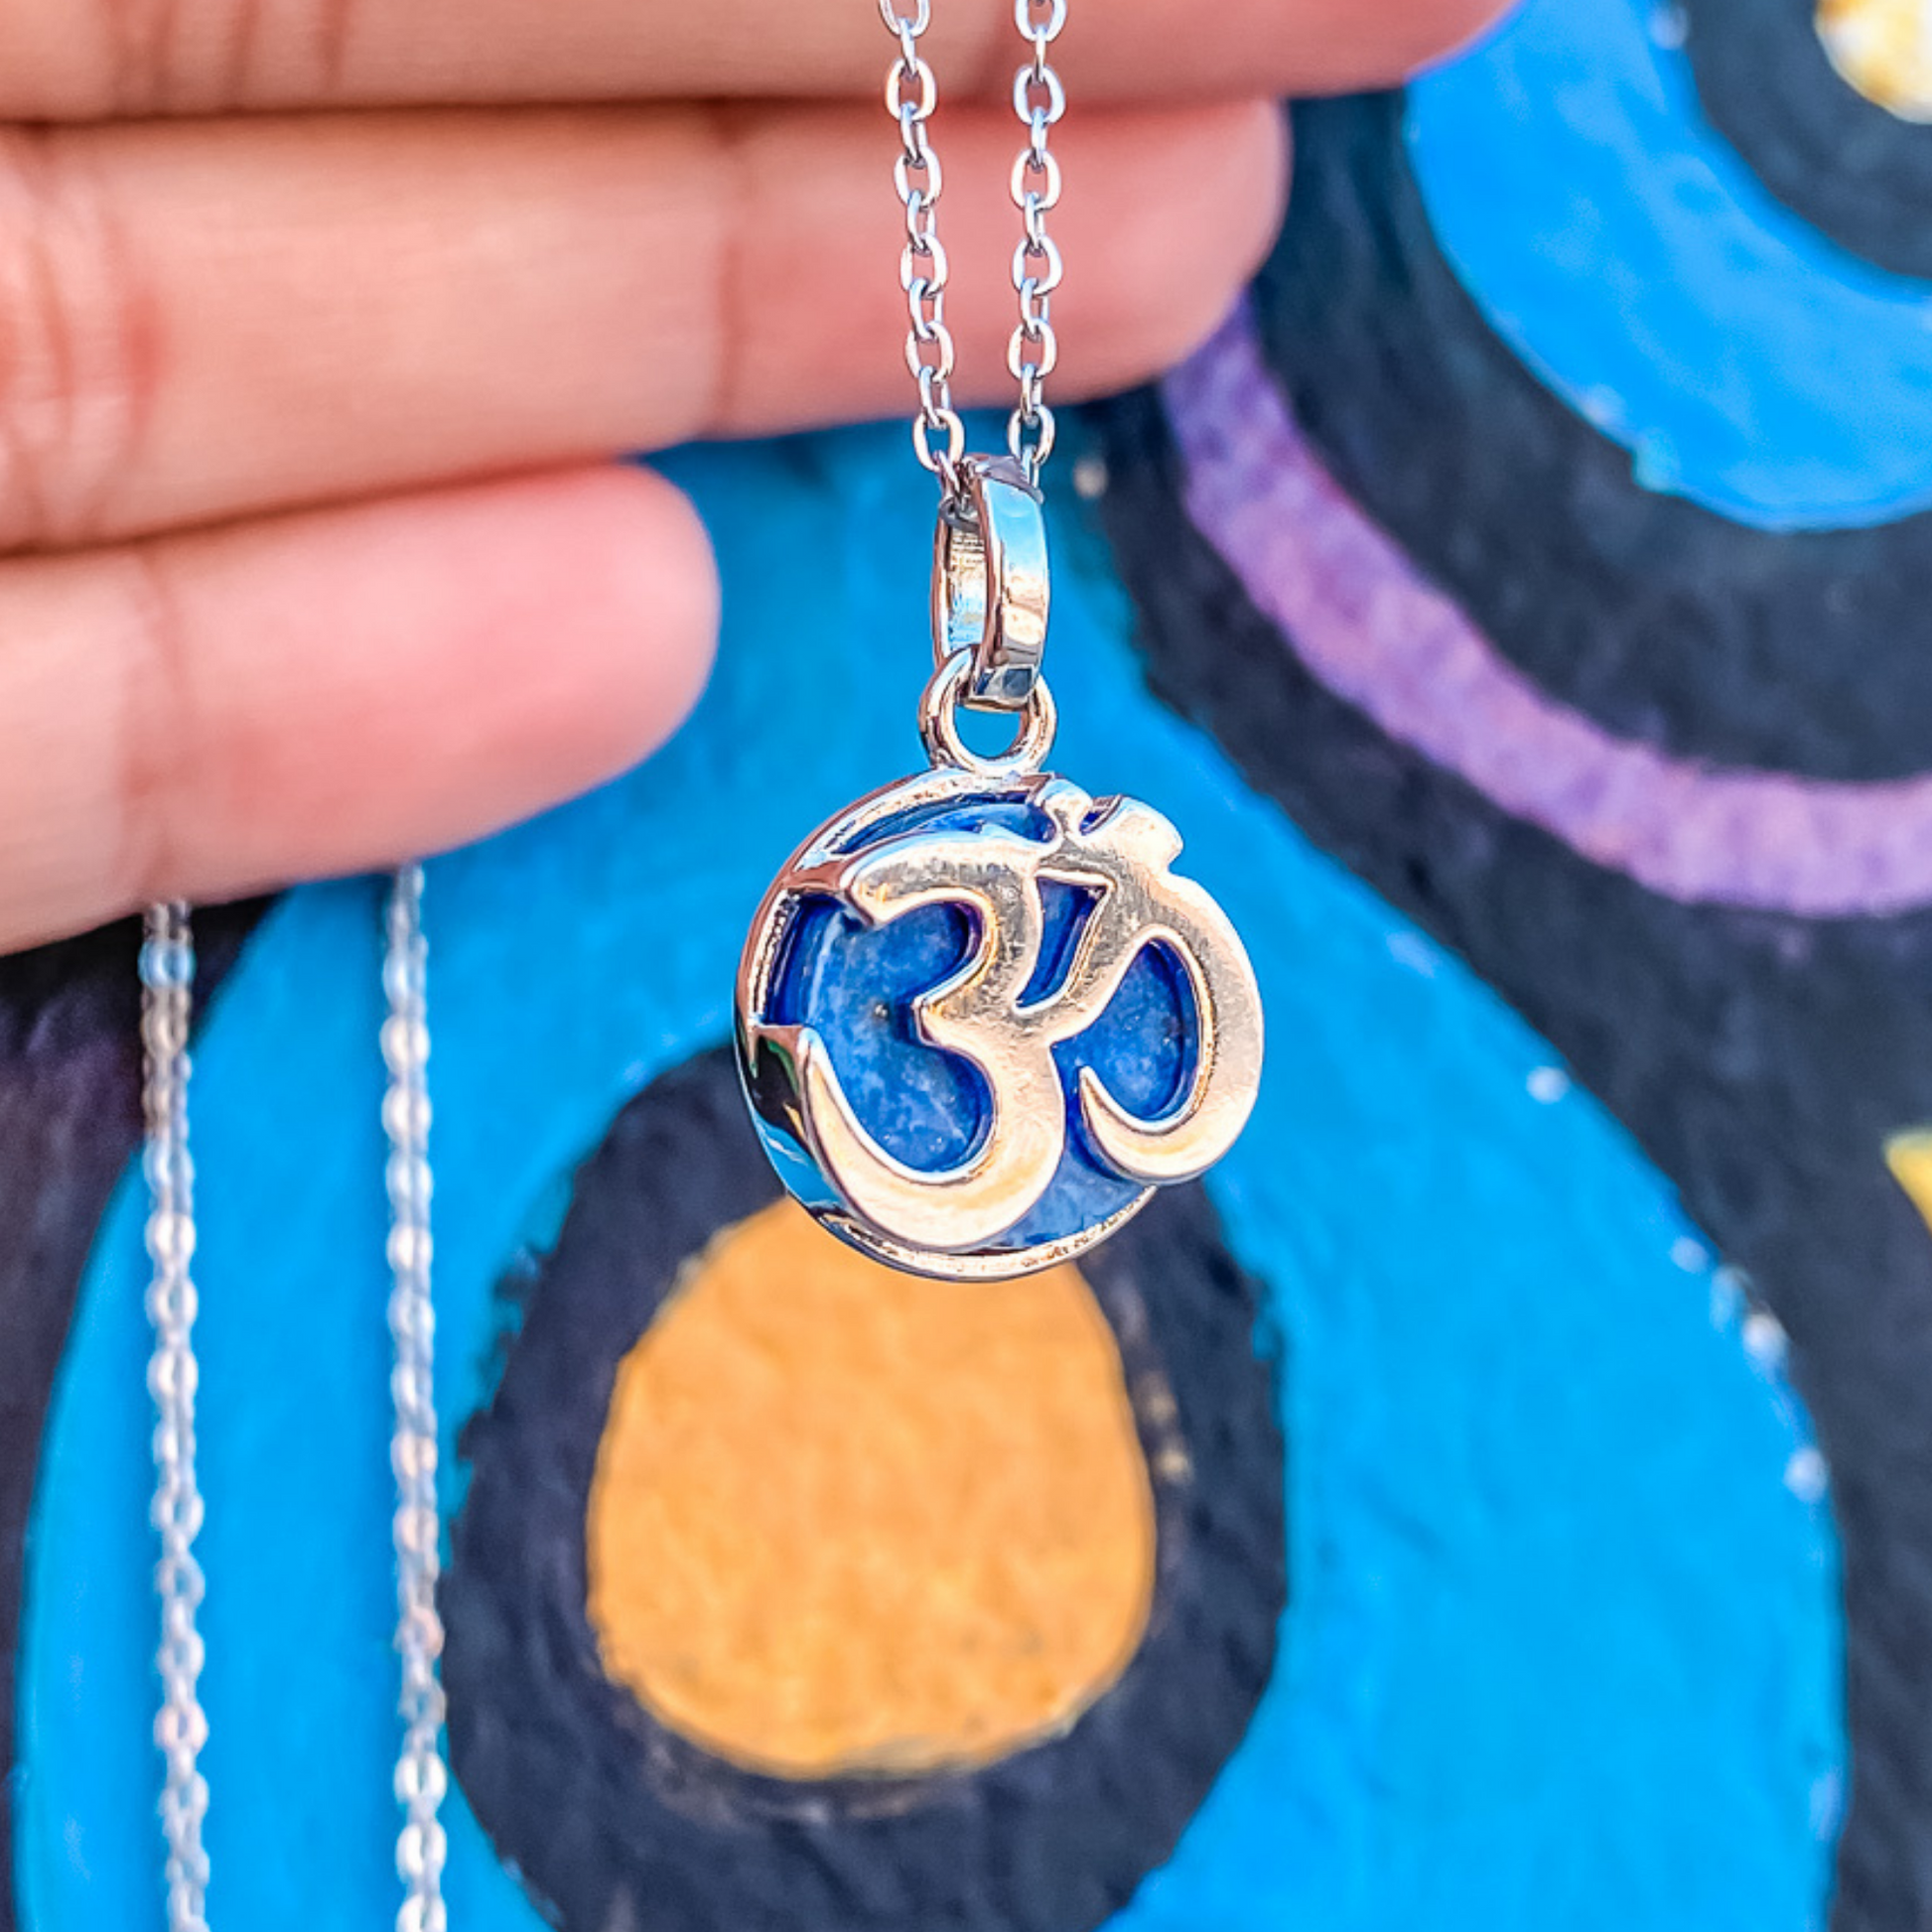 Om Yoga necklace with the third chakra gemstone crystal, Blue Crystal, Lapis Lazuli. Made by Born to Rock Jewelry